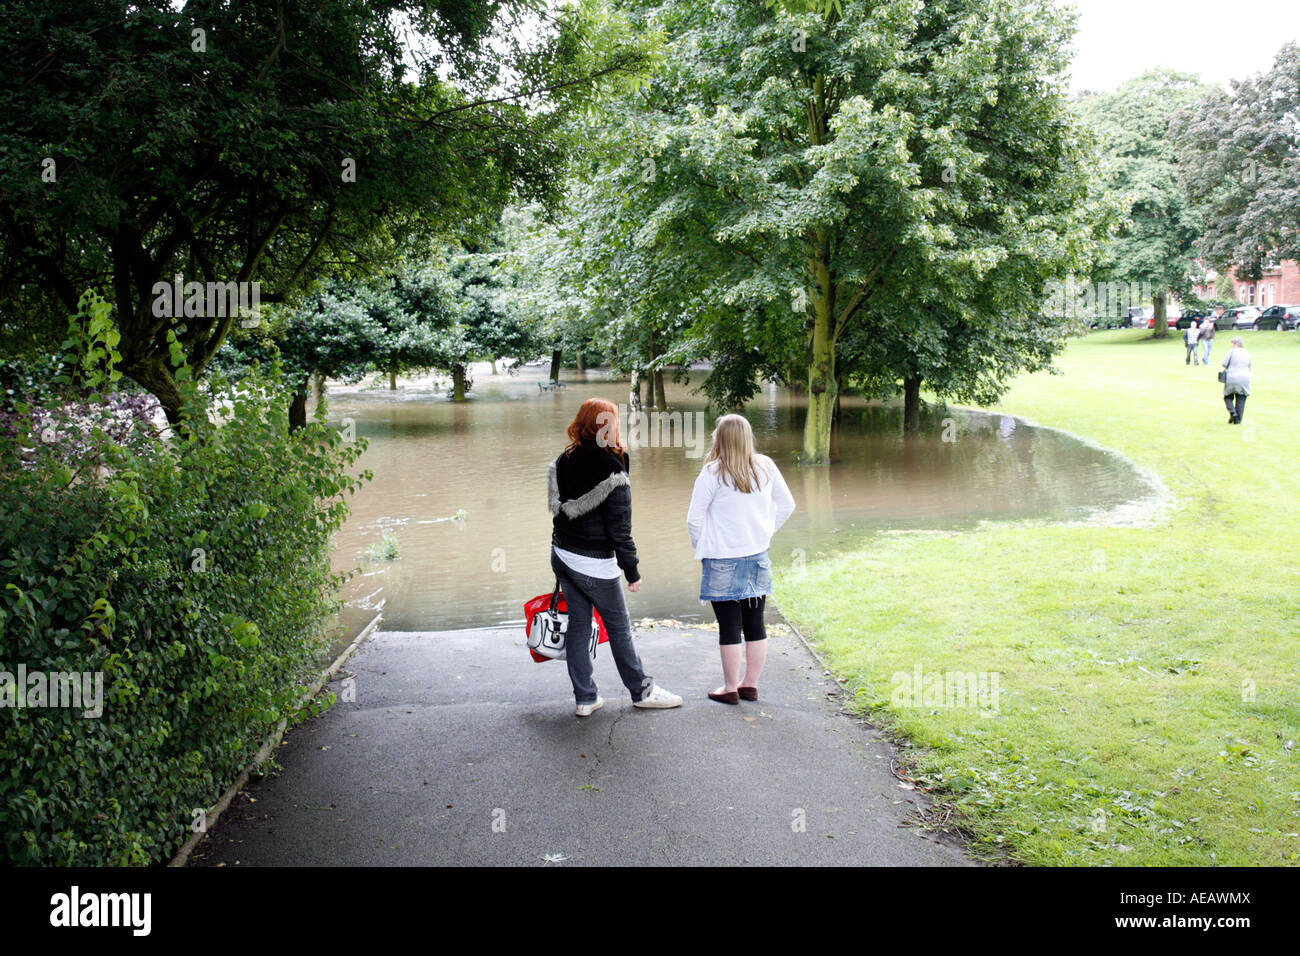 Teenage Girls Look at Flooded Street and Park, Leamington Spa, Warwickshire  July 2007 Stock Photo